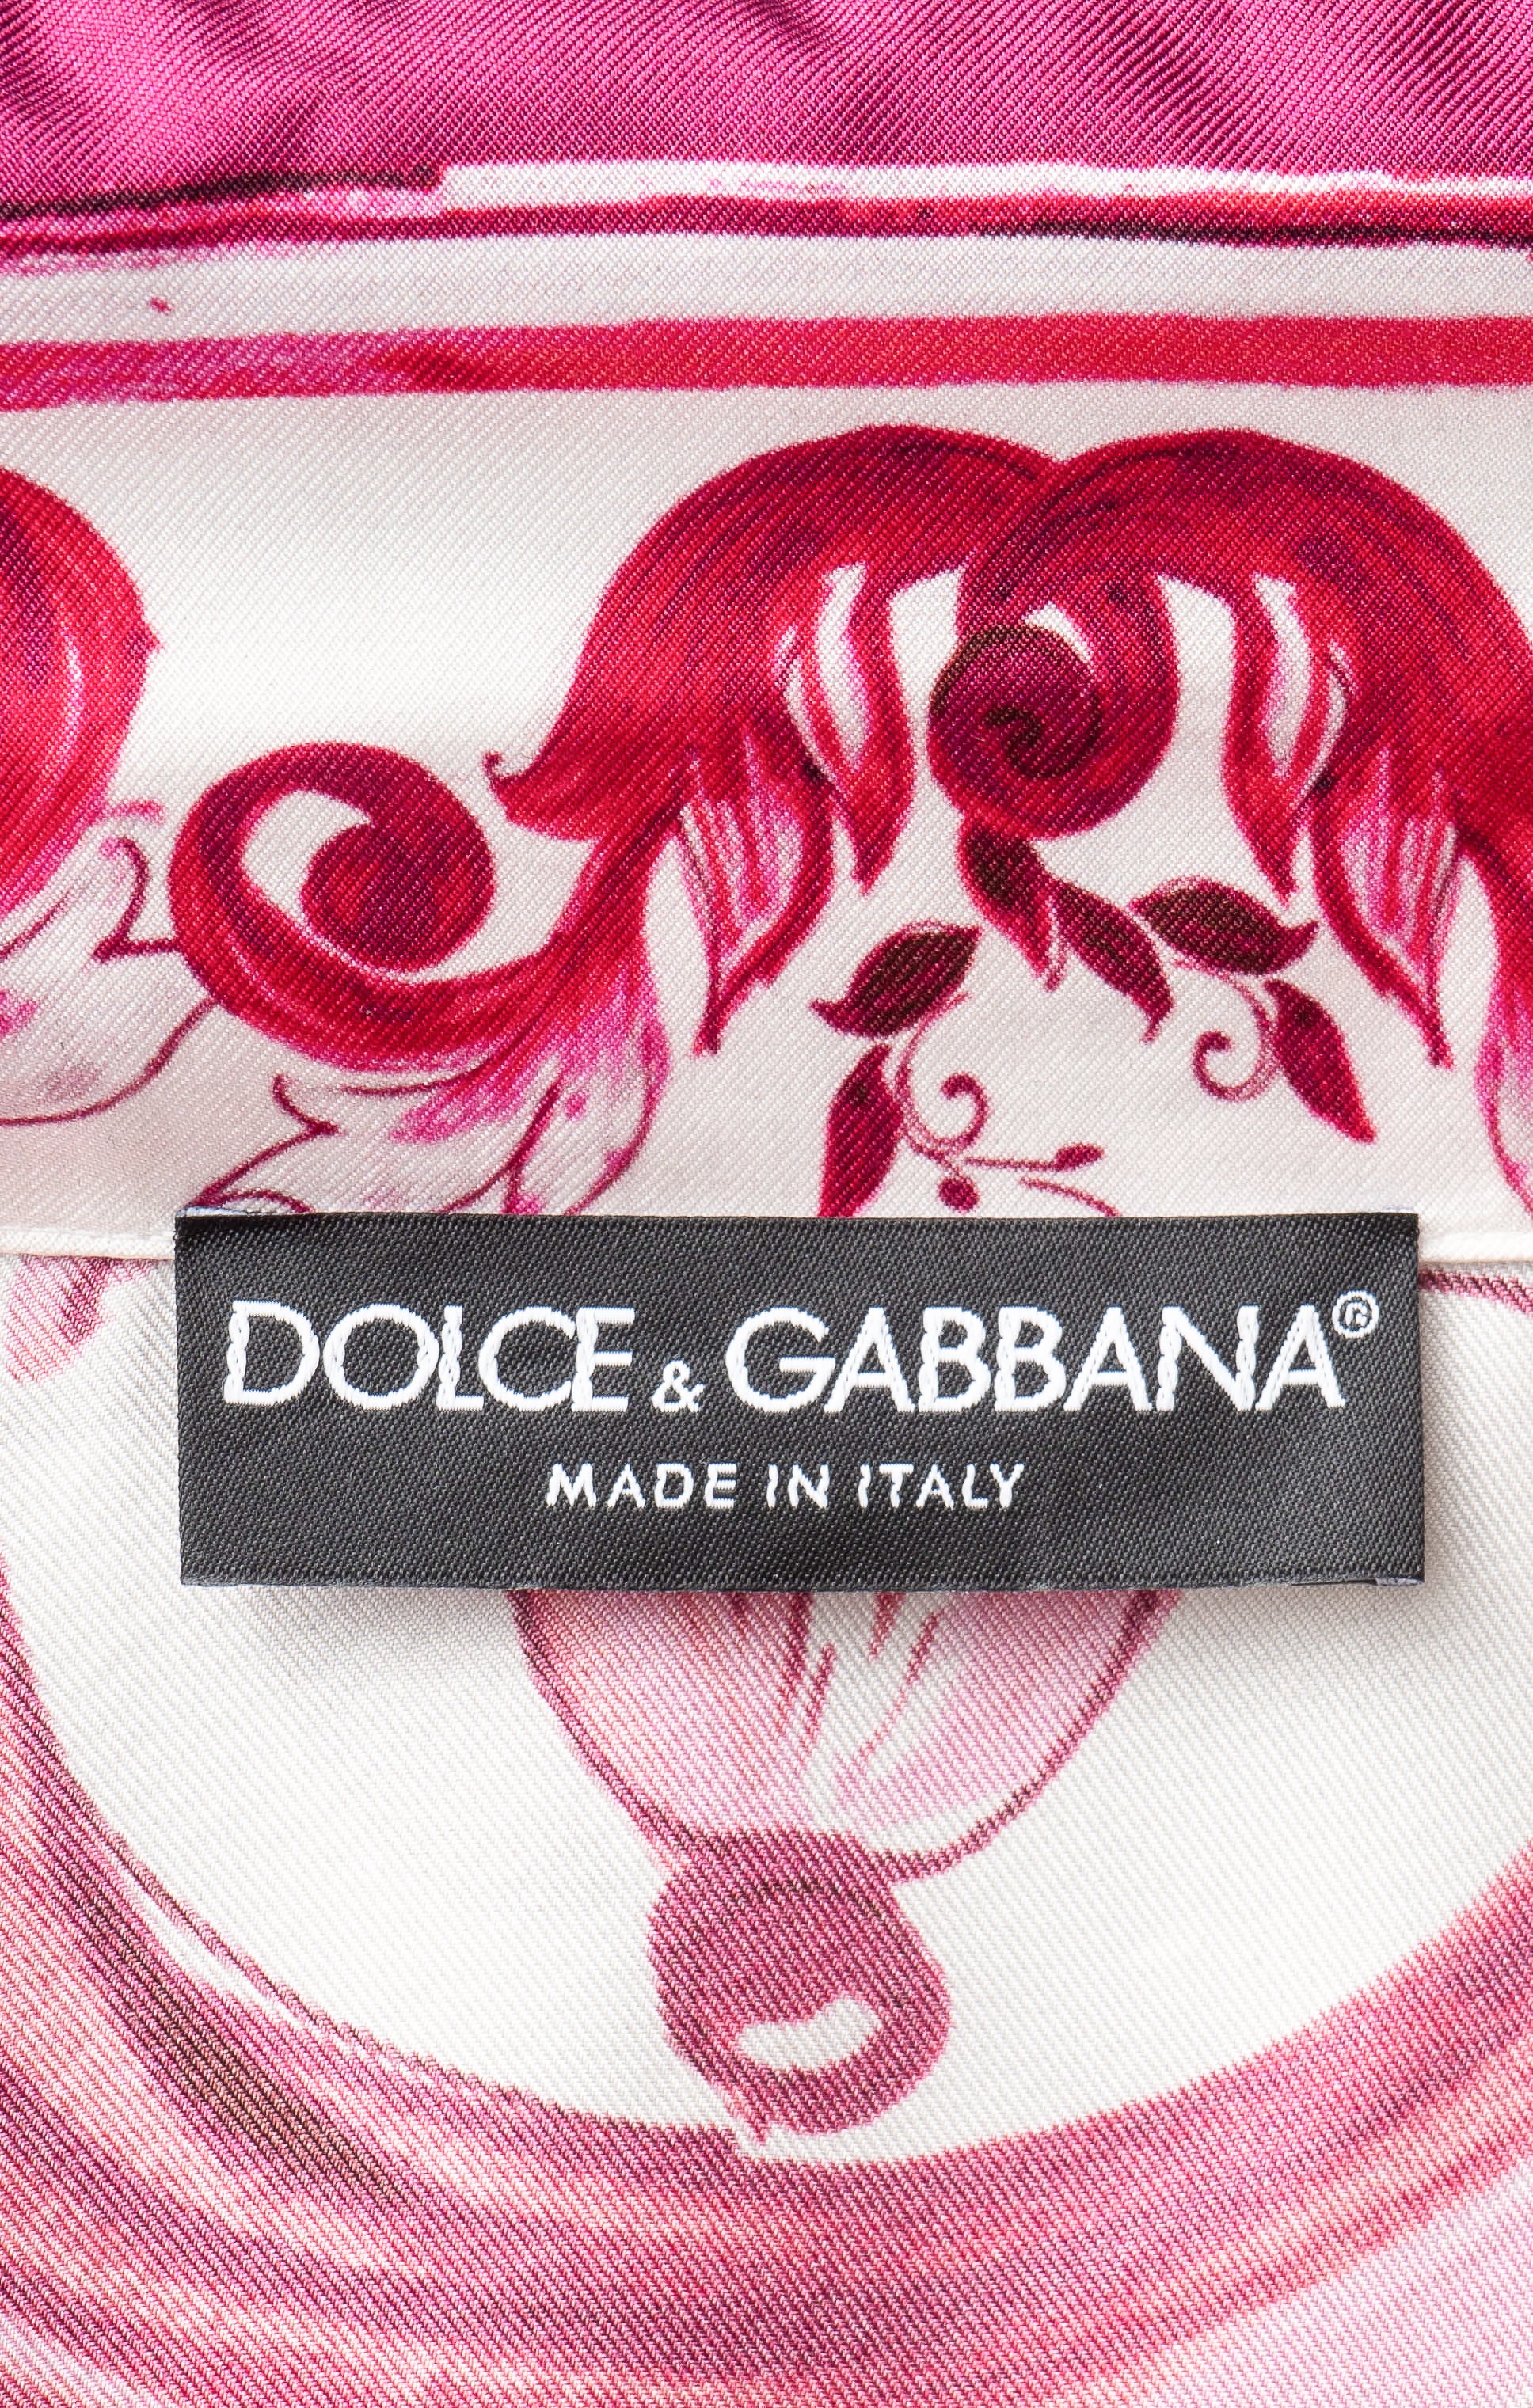 DOLCE & GABBANA Dress Size: IT 42 / Comparable to US 4-6